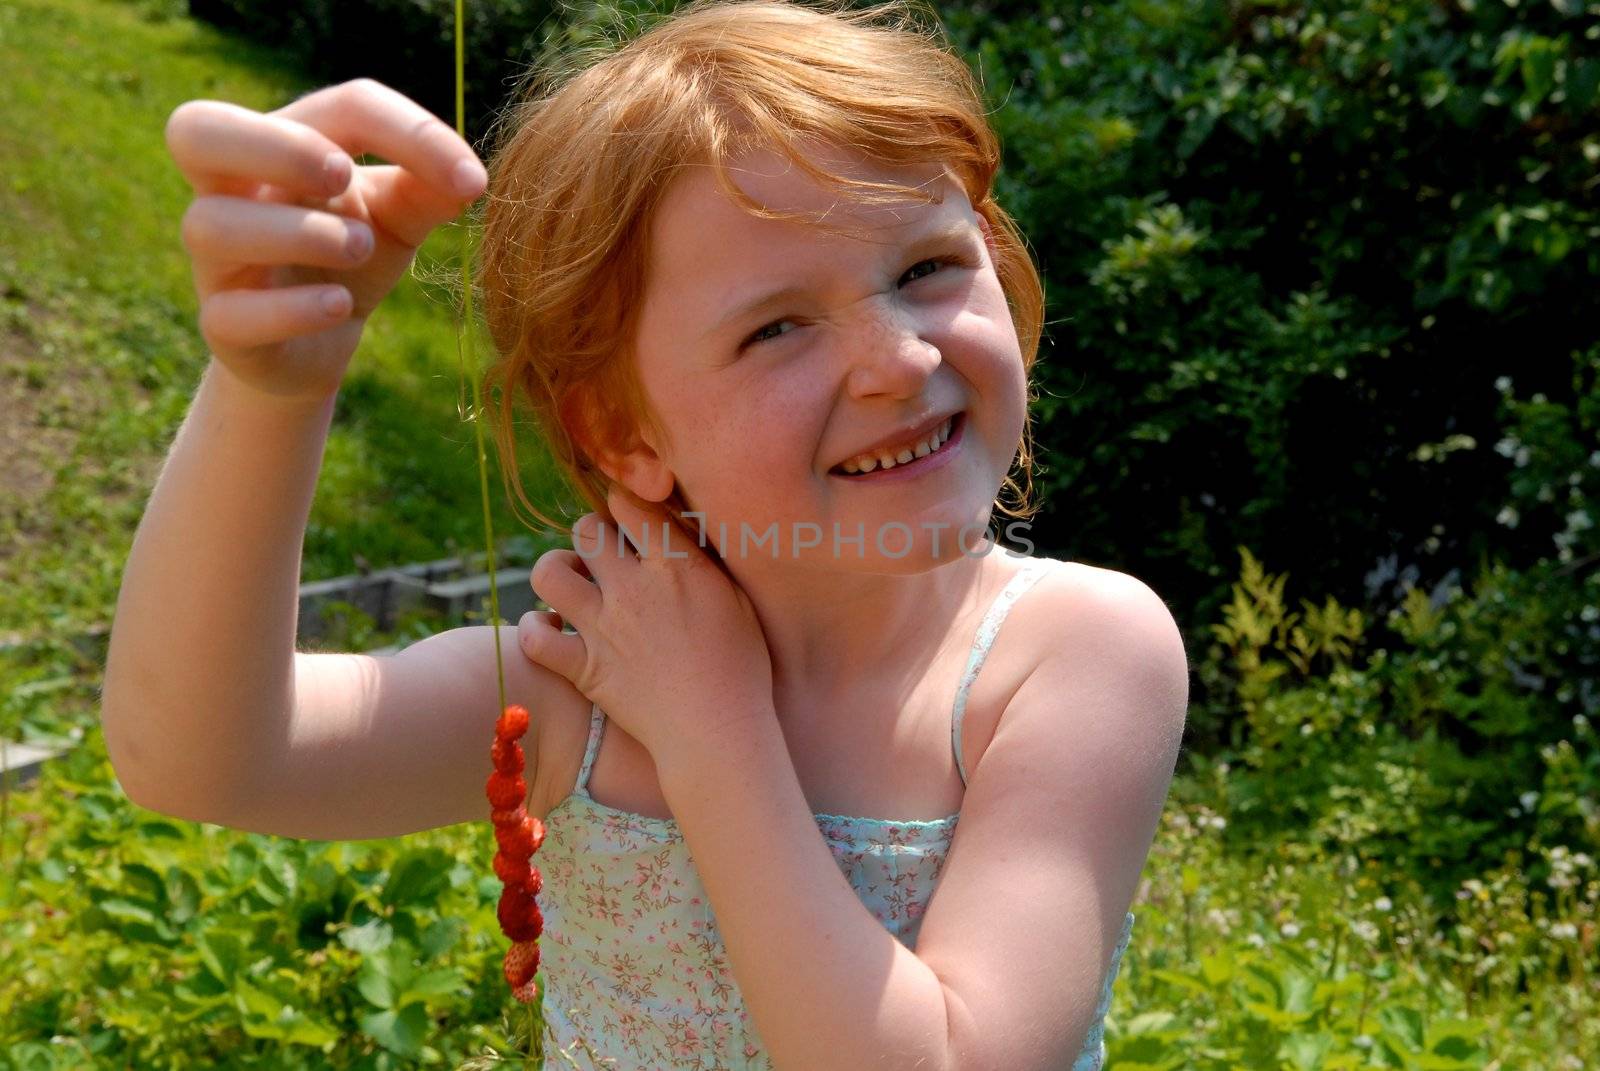 girl making the strawberry string. Please note: No negative use allowed.